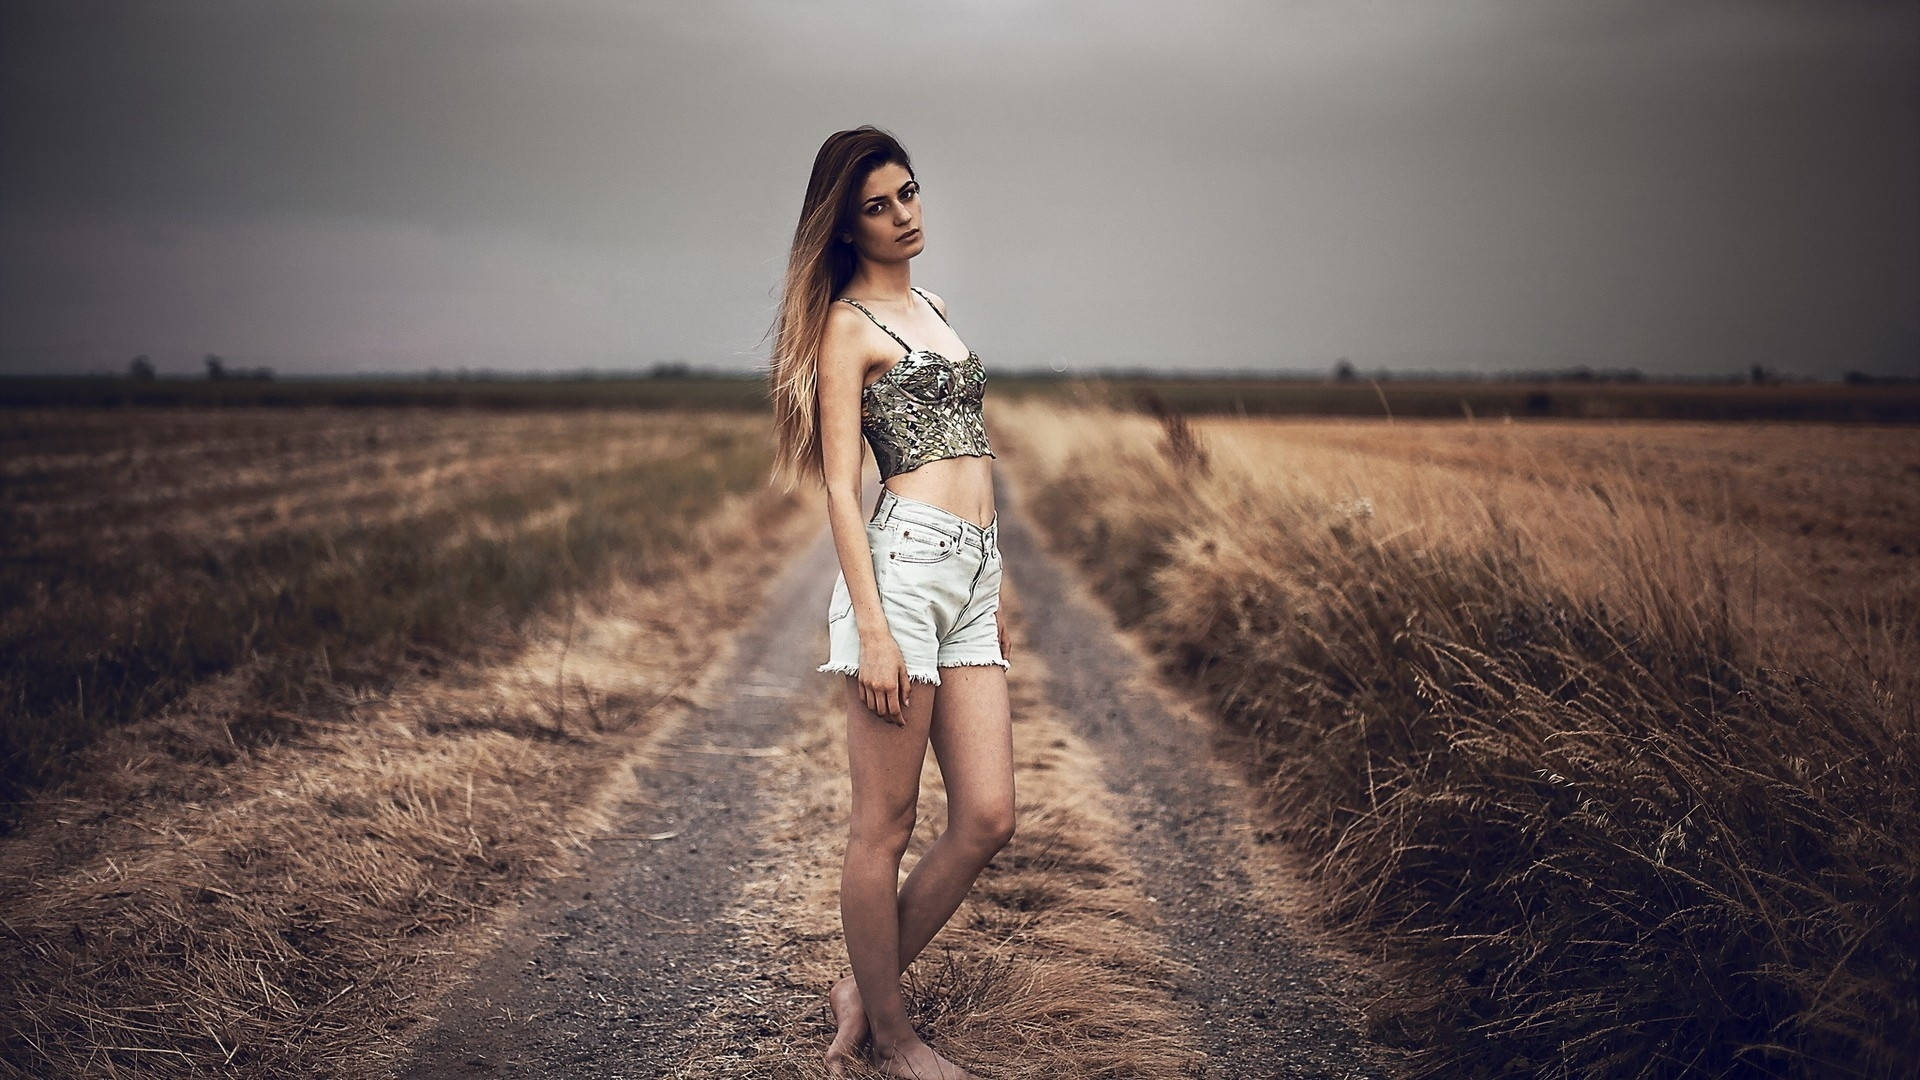 Female Model On Country Road Wallpaper